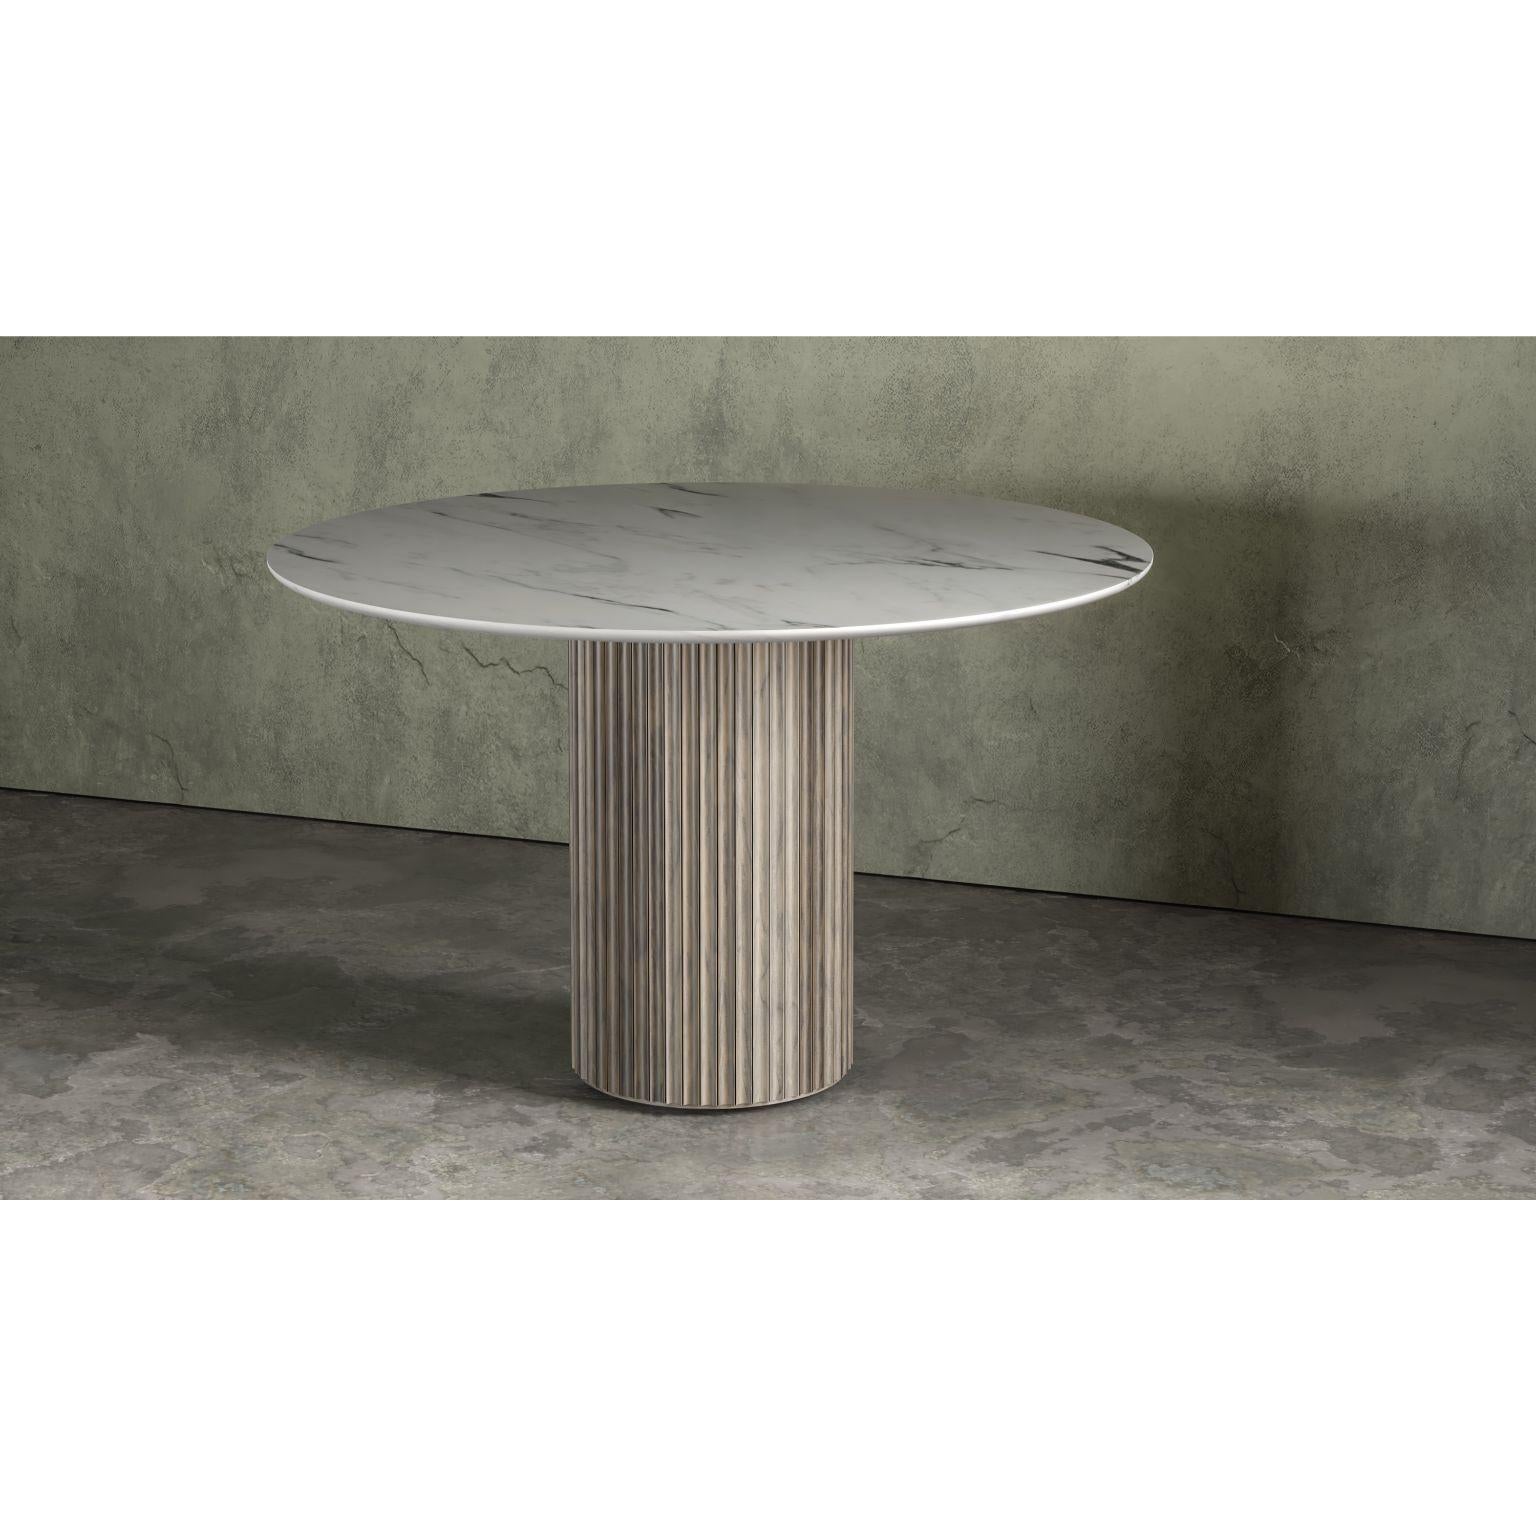 Pilar round dining table by Indo Made
One of a kind.
Dimensions: Ø122 X 76.2 cm 
Materials: Oxidized Maple, White Carrara marble top.

Also available in other materials and finishes. 
Each piece is carefully handcrafted by our team using